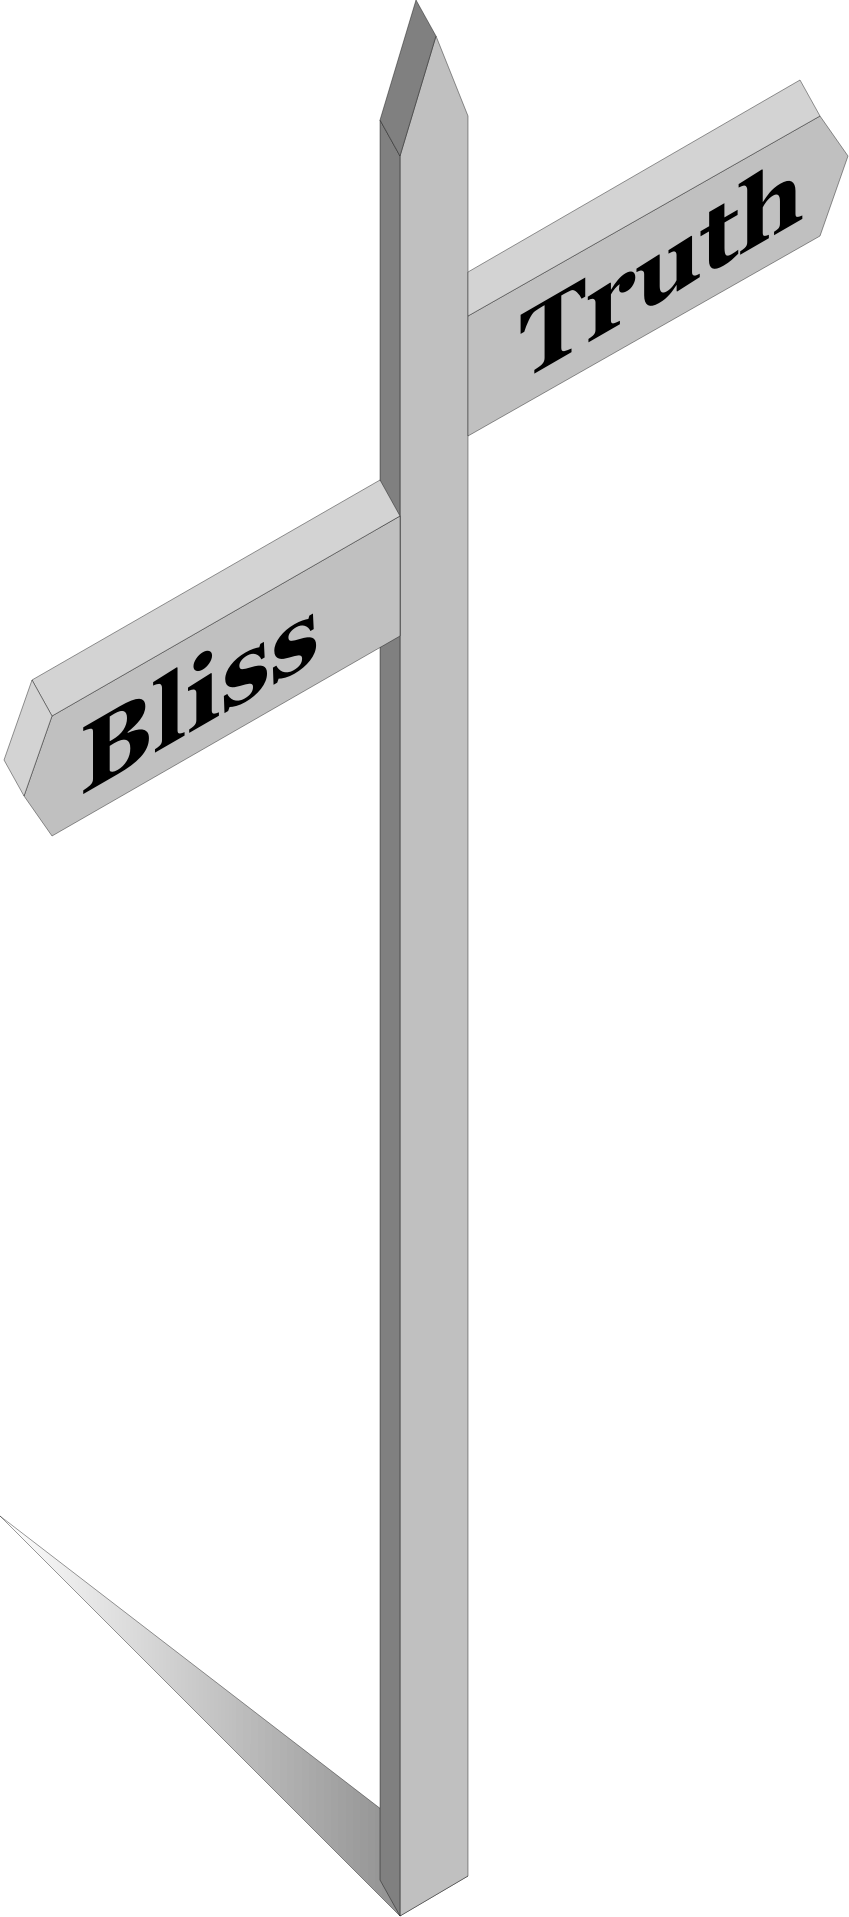 Of Blissful Truth - Street Sign (849x1917)